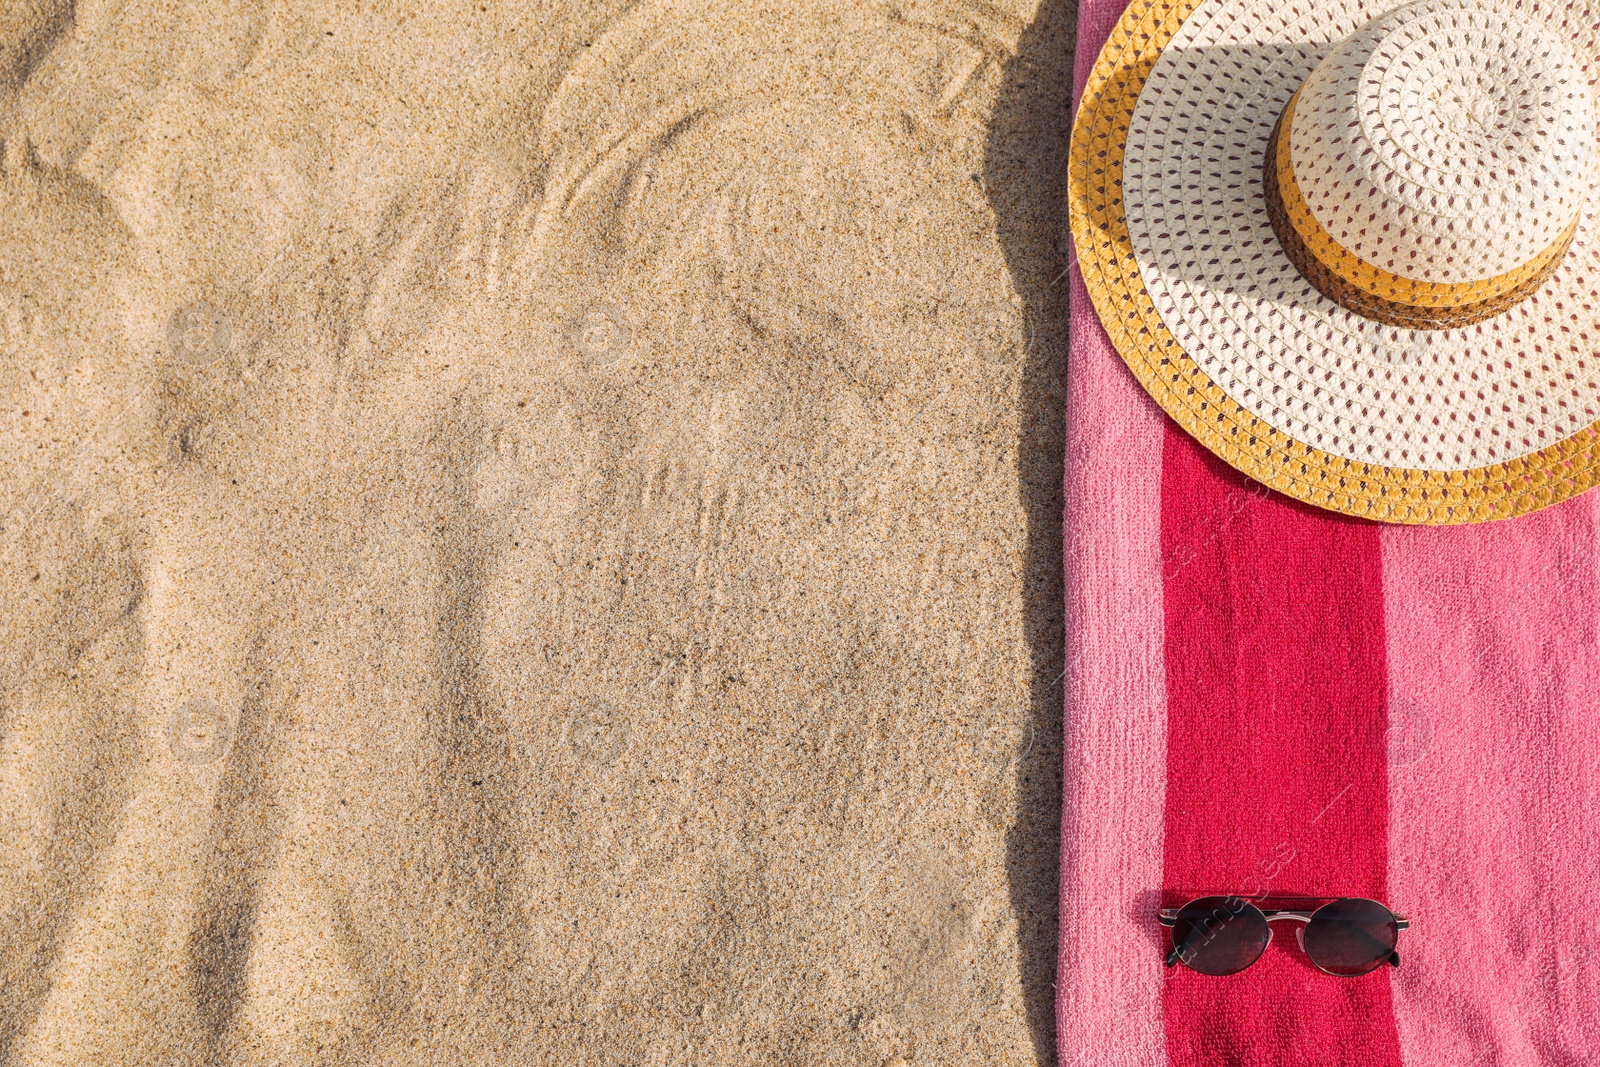 Photo of Beach towel with straw hat and sunglasses on sand, flat lay. Space for text